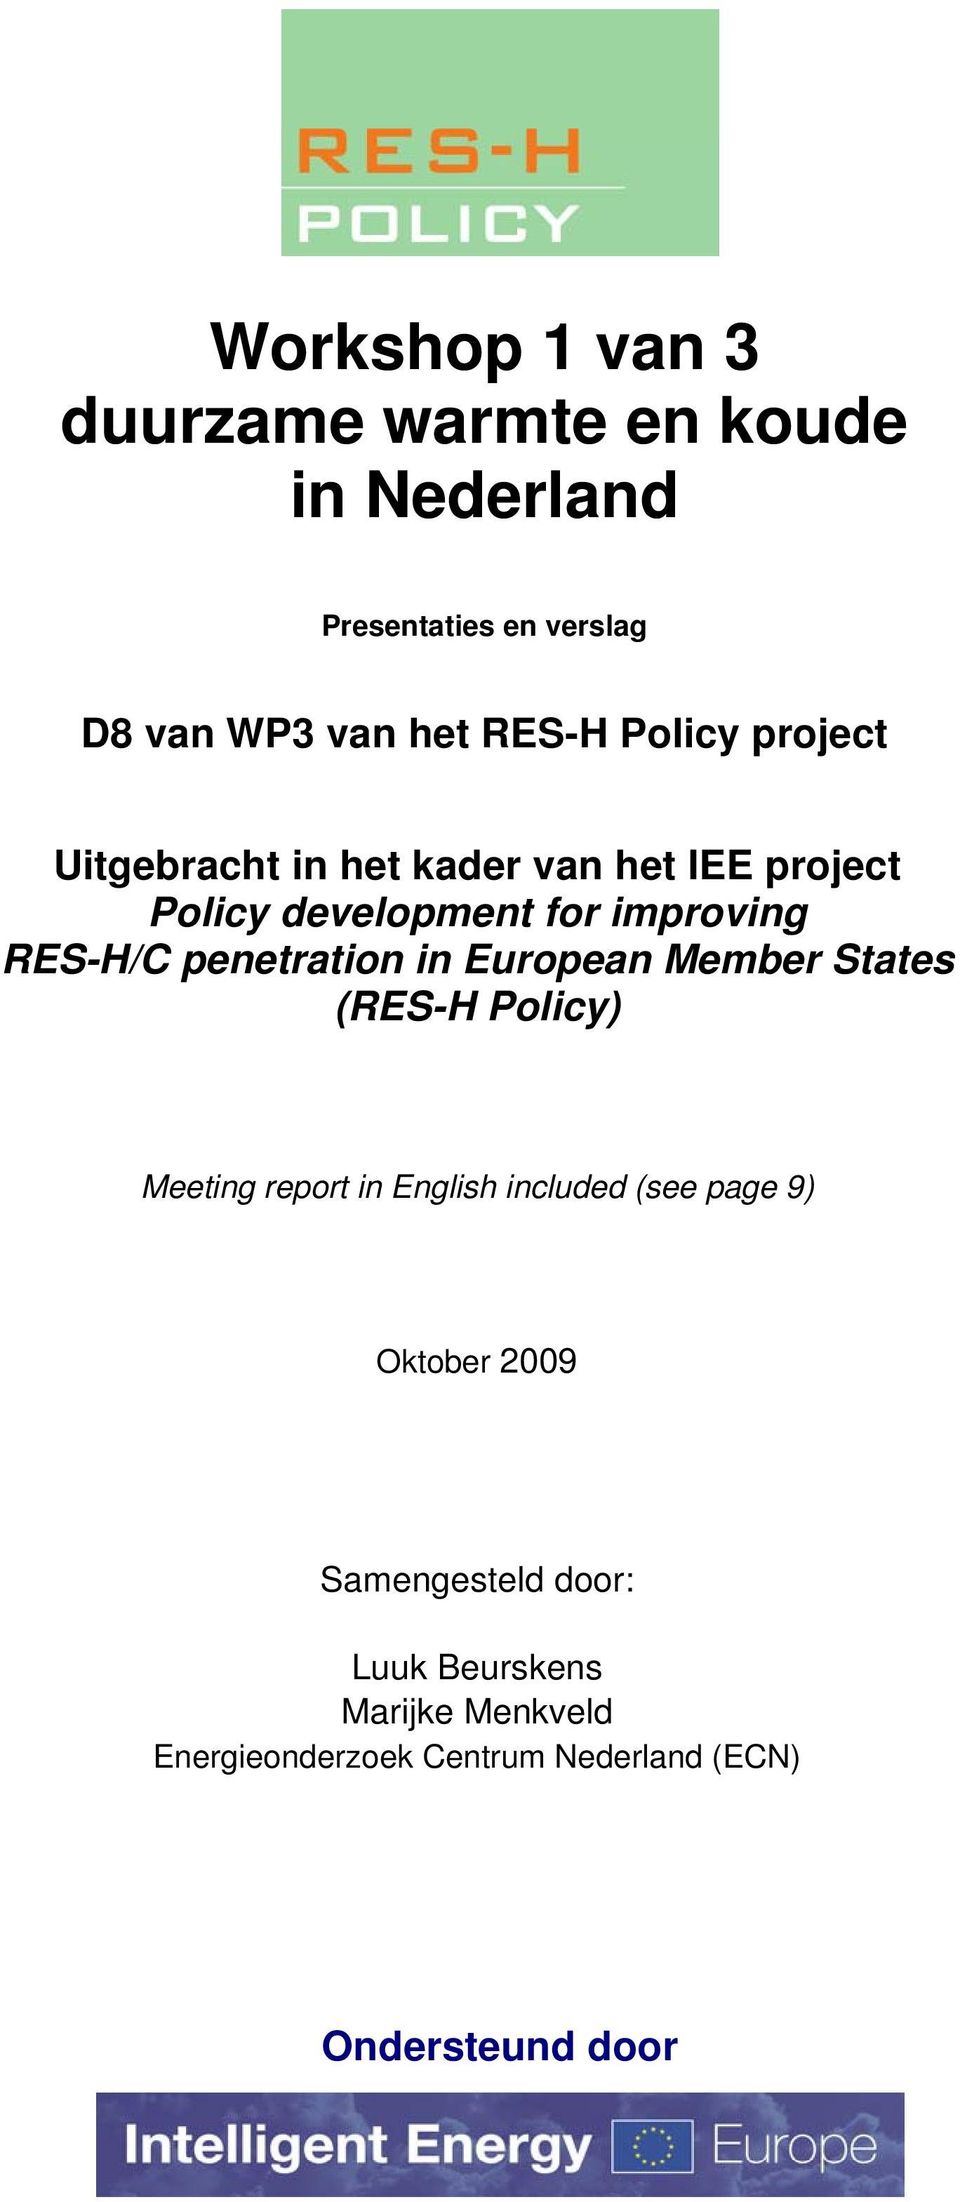 penetration in European Member States (RES-H Policy) Meeting report in English included (see page 9)